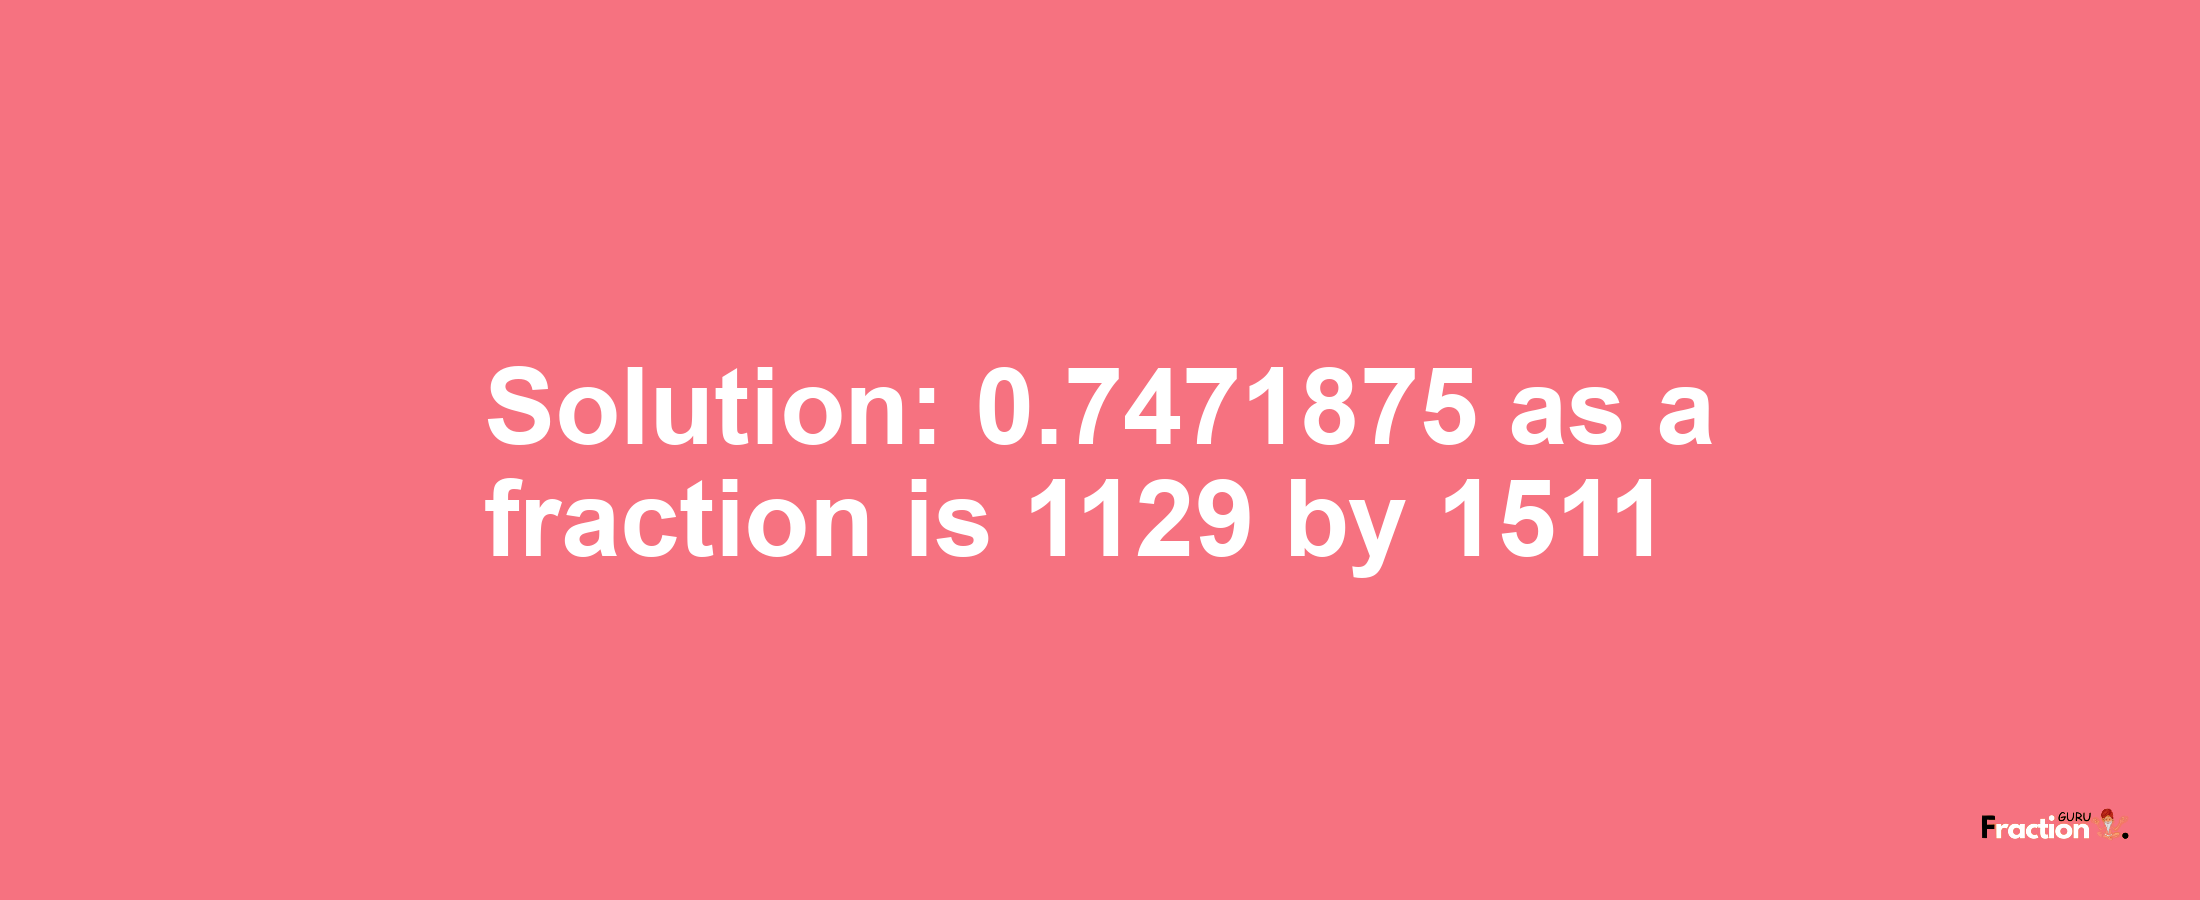 Solution:0.7471875 as a fraction is 1129/1511